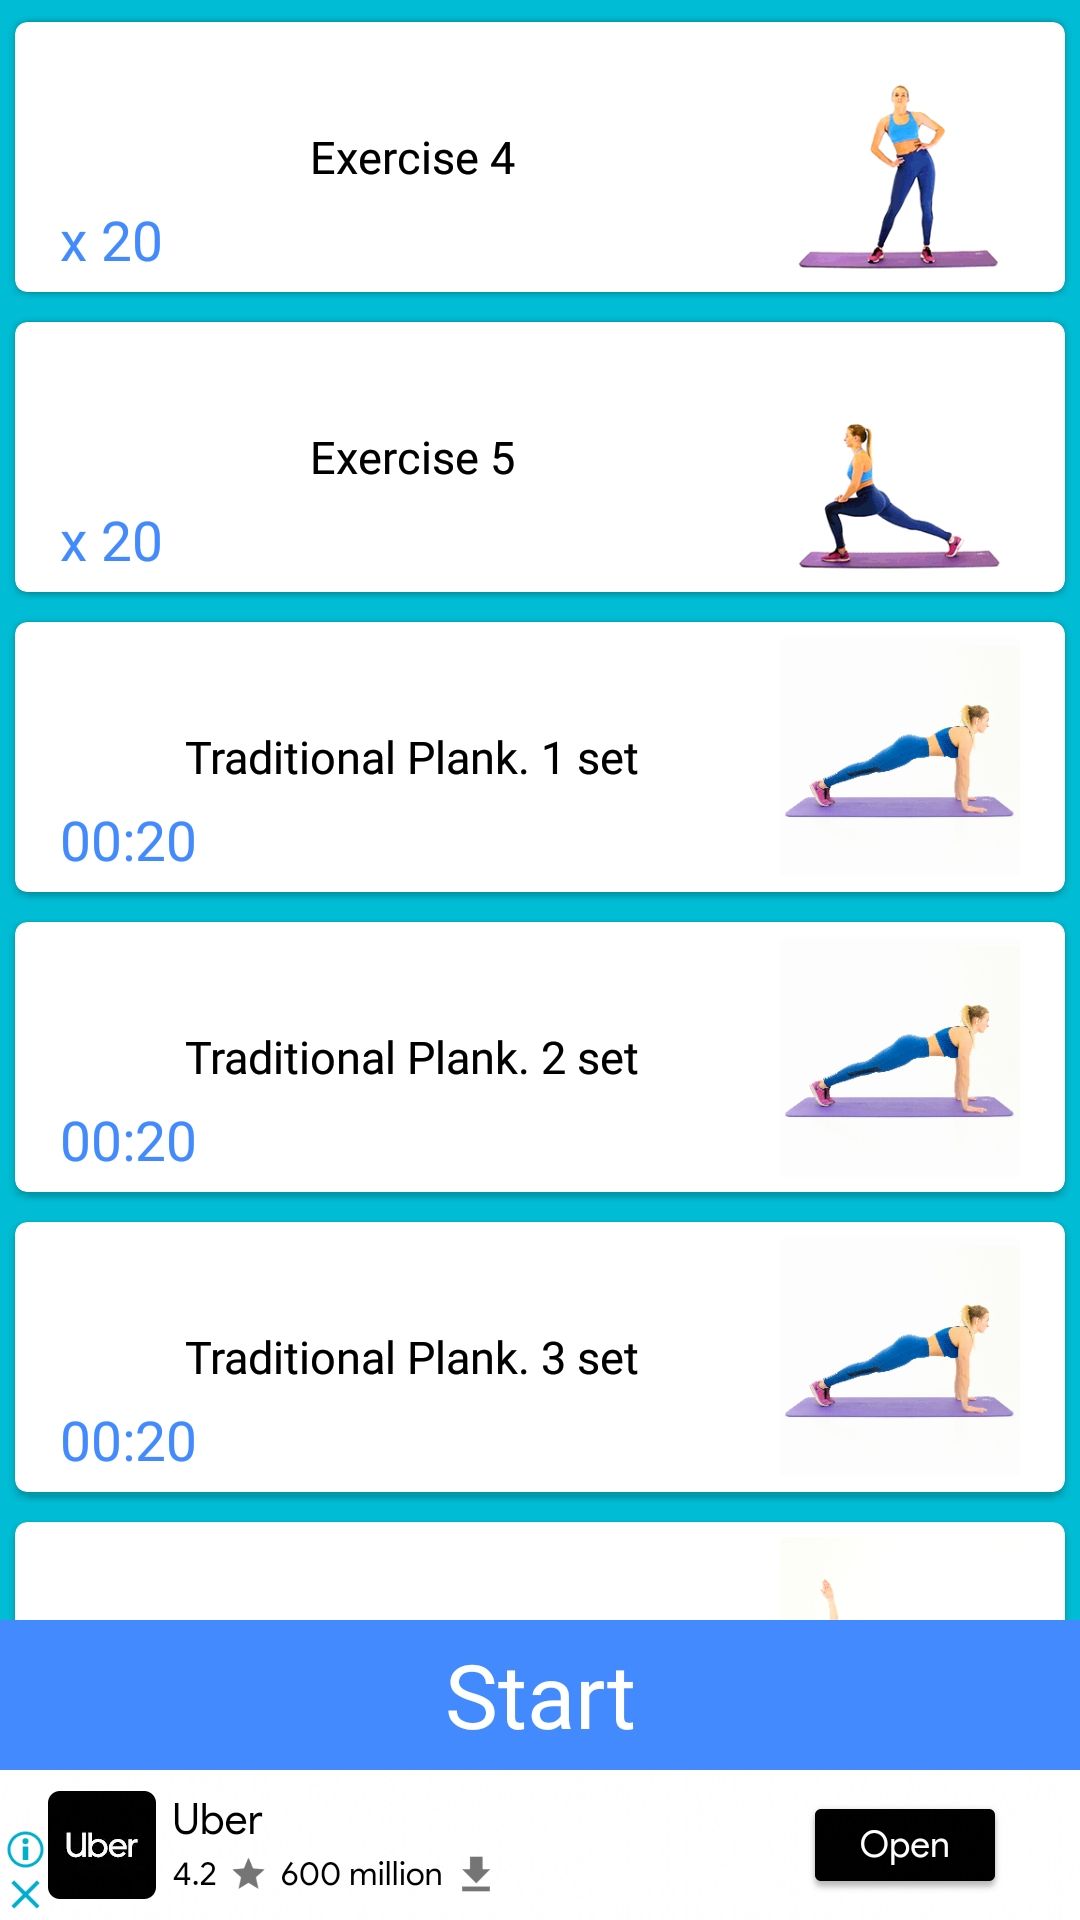 Plank Workout 30 Days mobile app exercises